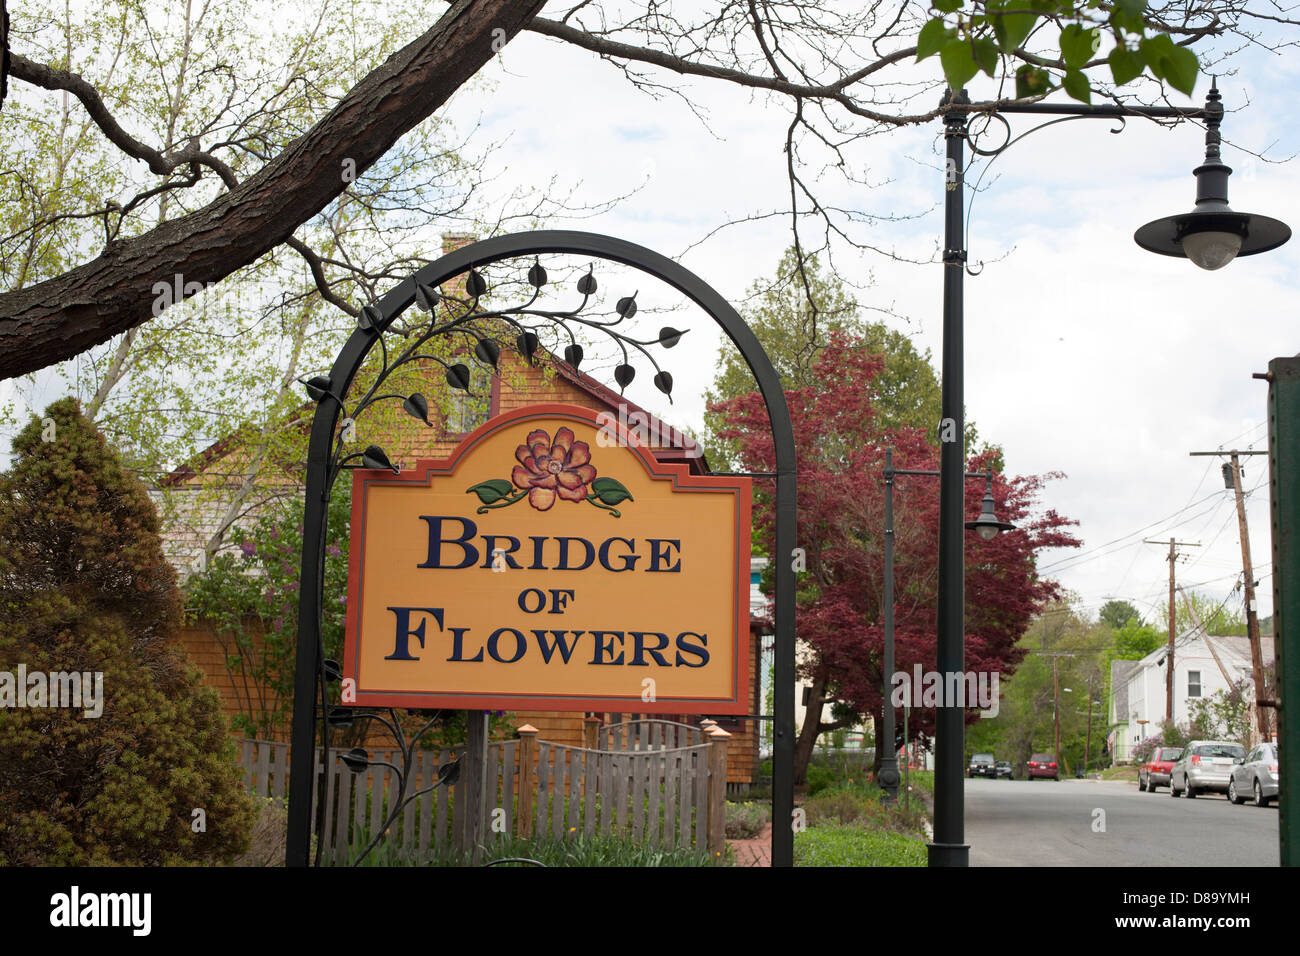 A carefully crafted sign announces the The calm Deerfield river reflects the  Shelburne Falls Bridge of Flowers. Stock Photo